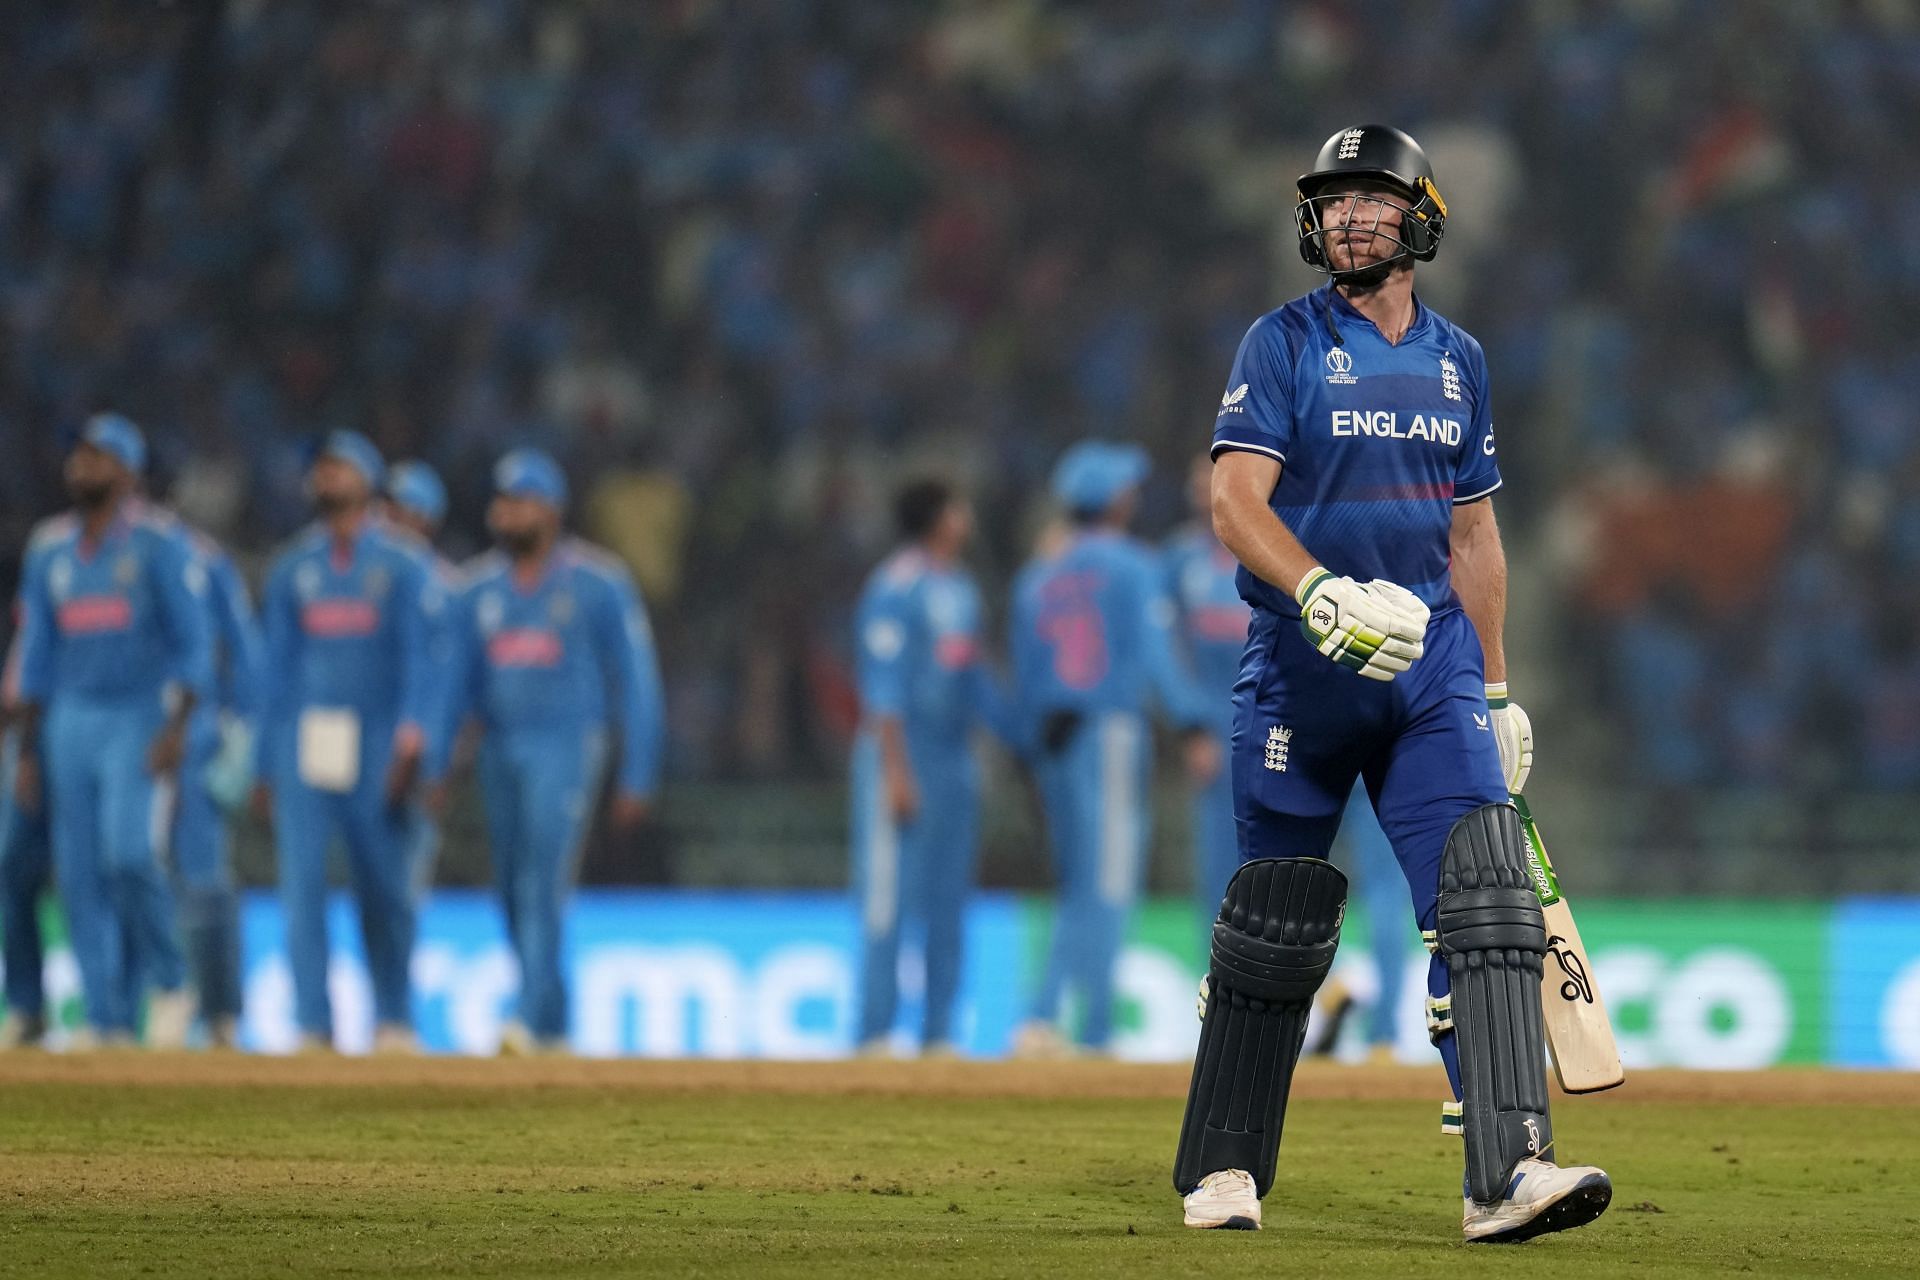 England are on the verge of being eliminated from the ongoing World Cup. [P/C: AP]